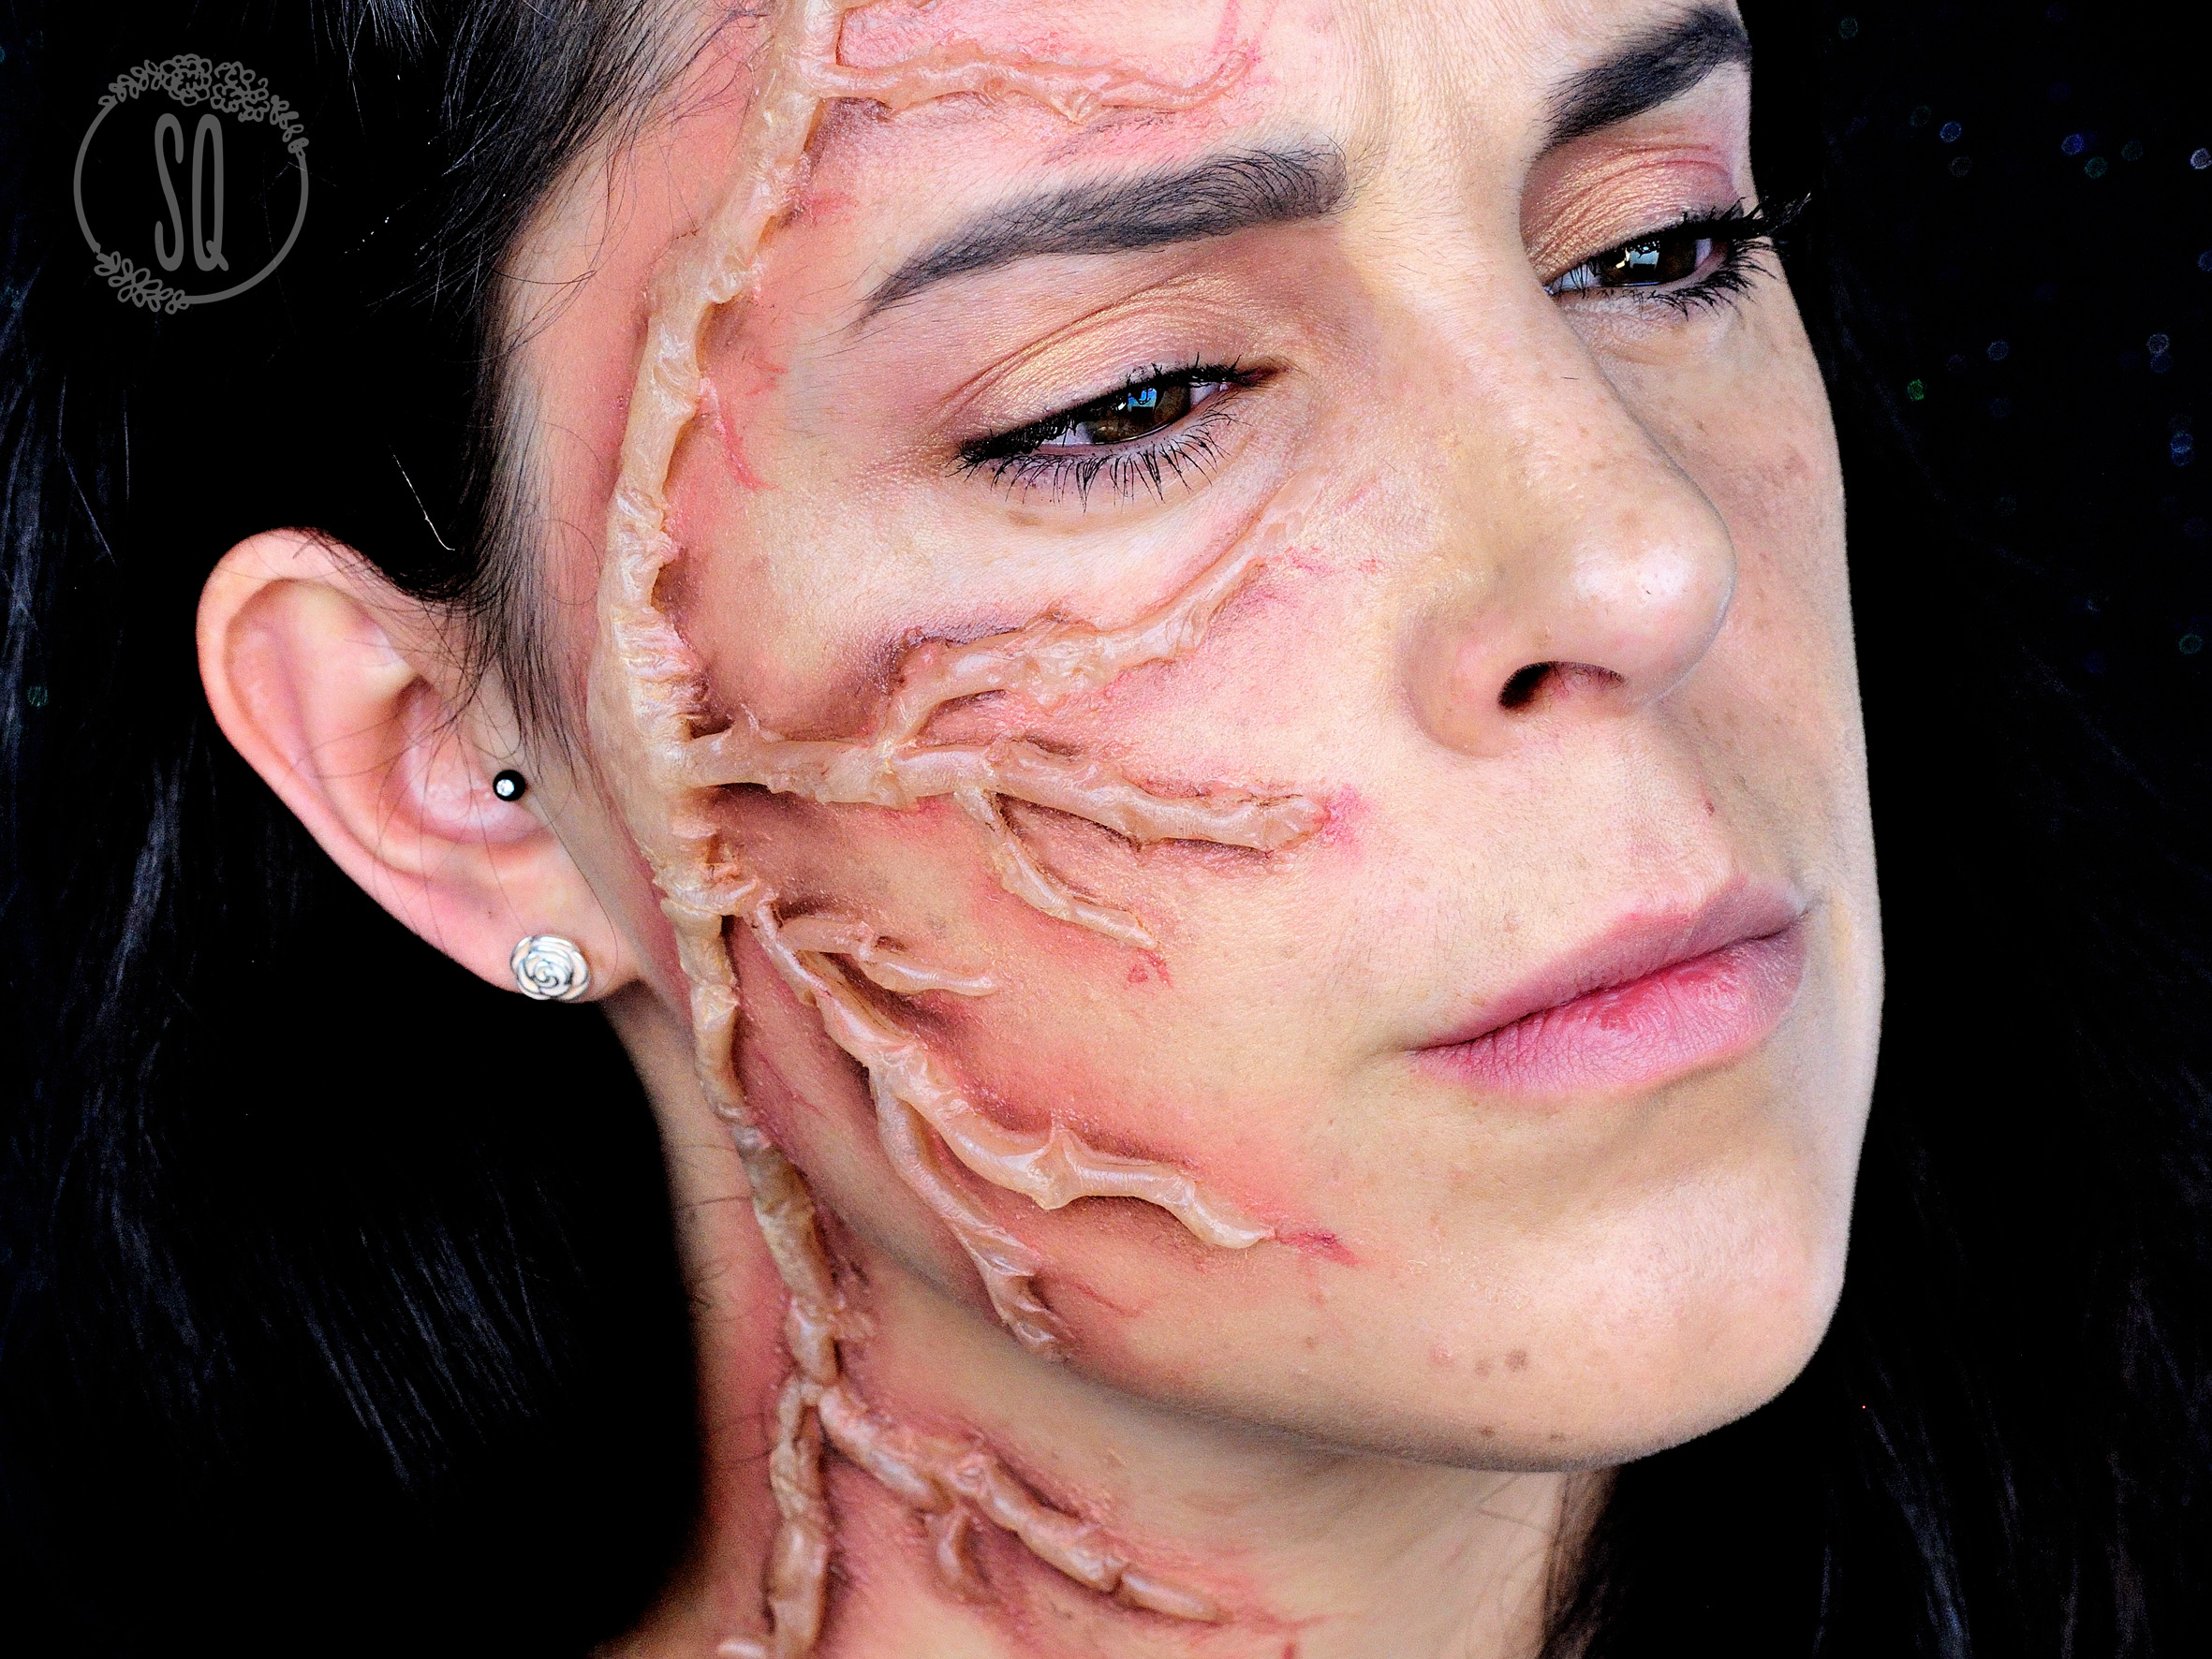 Infection malignant makeup effect -